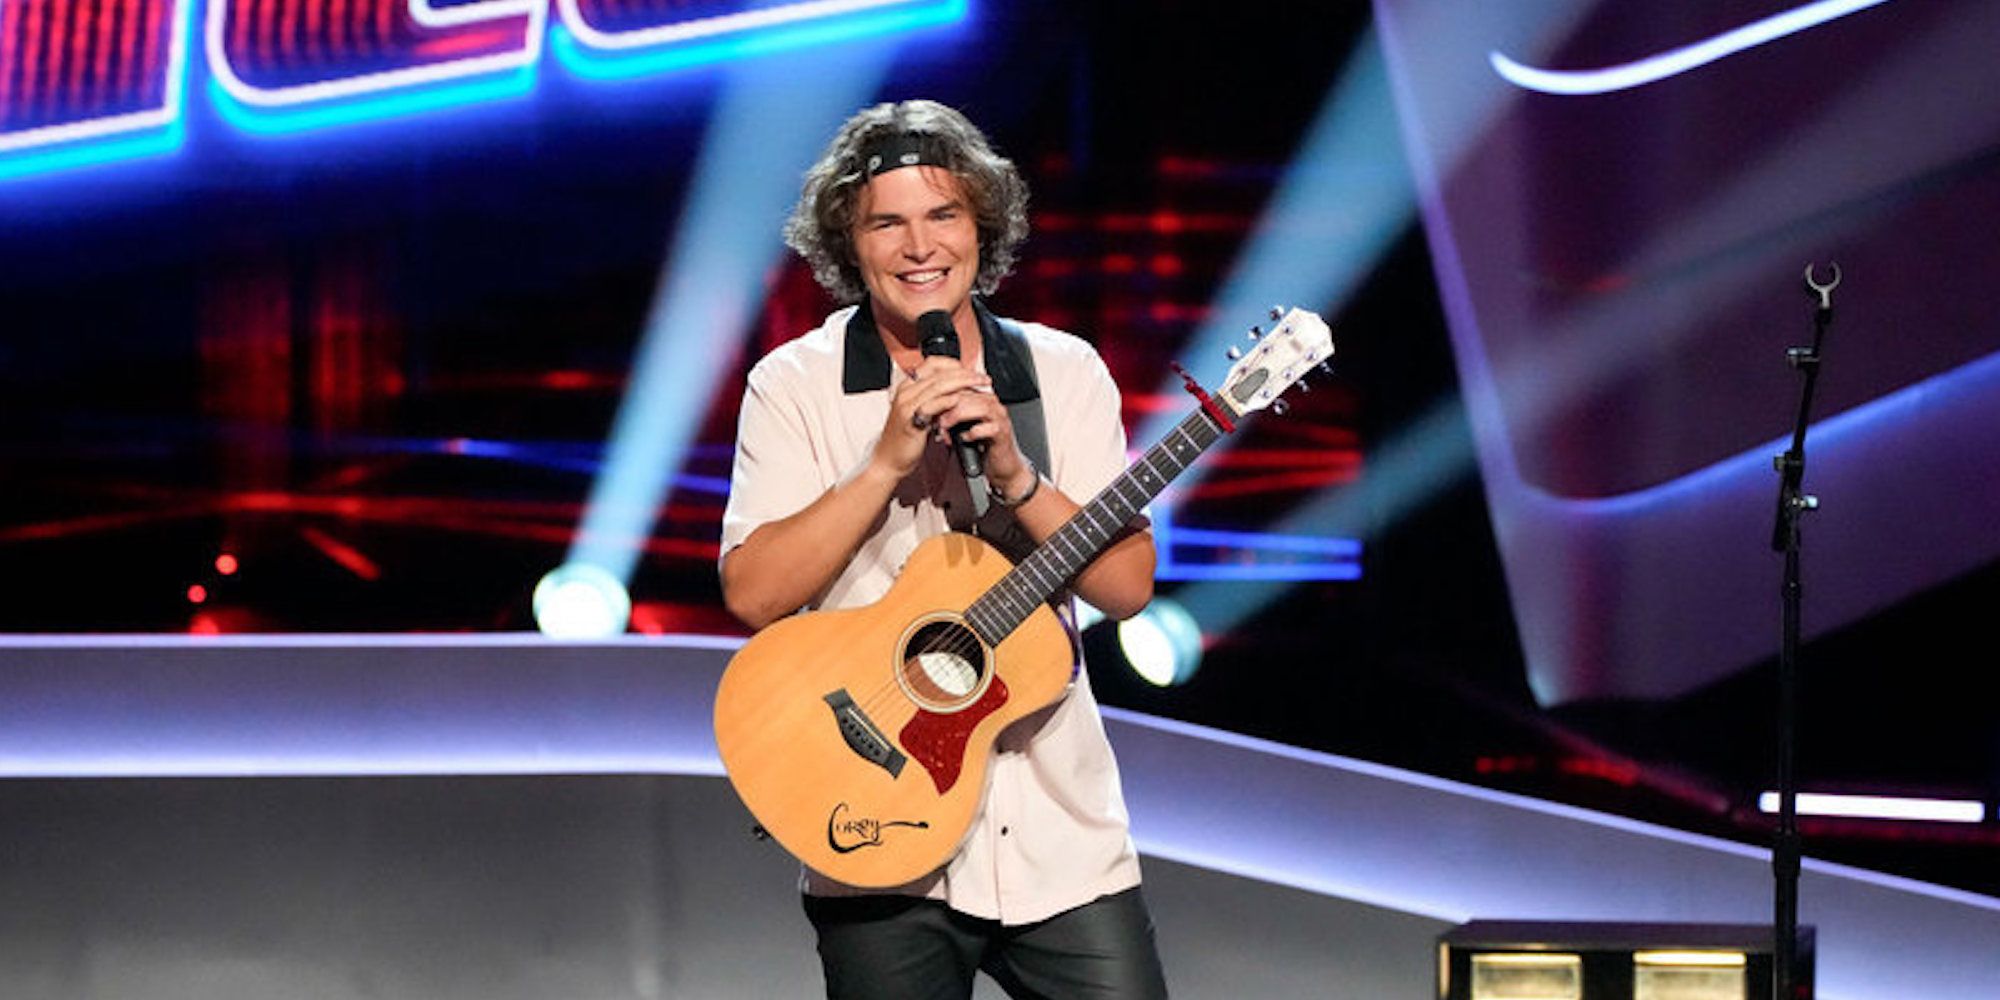 Corey Curtis auditions for 'The Voice' accompanied by an acoustic guitar